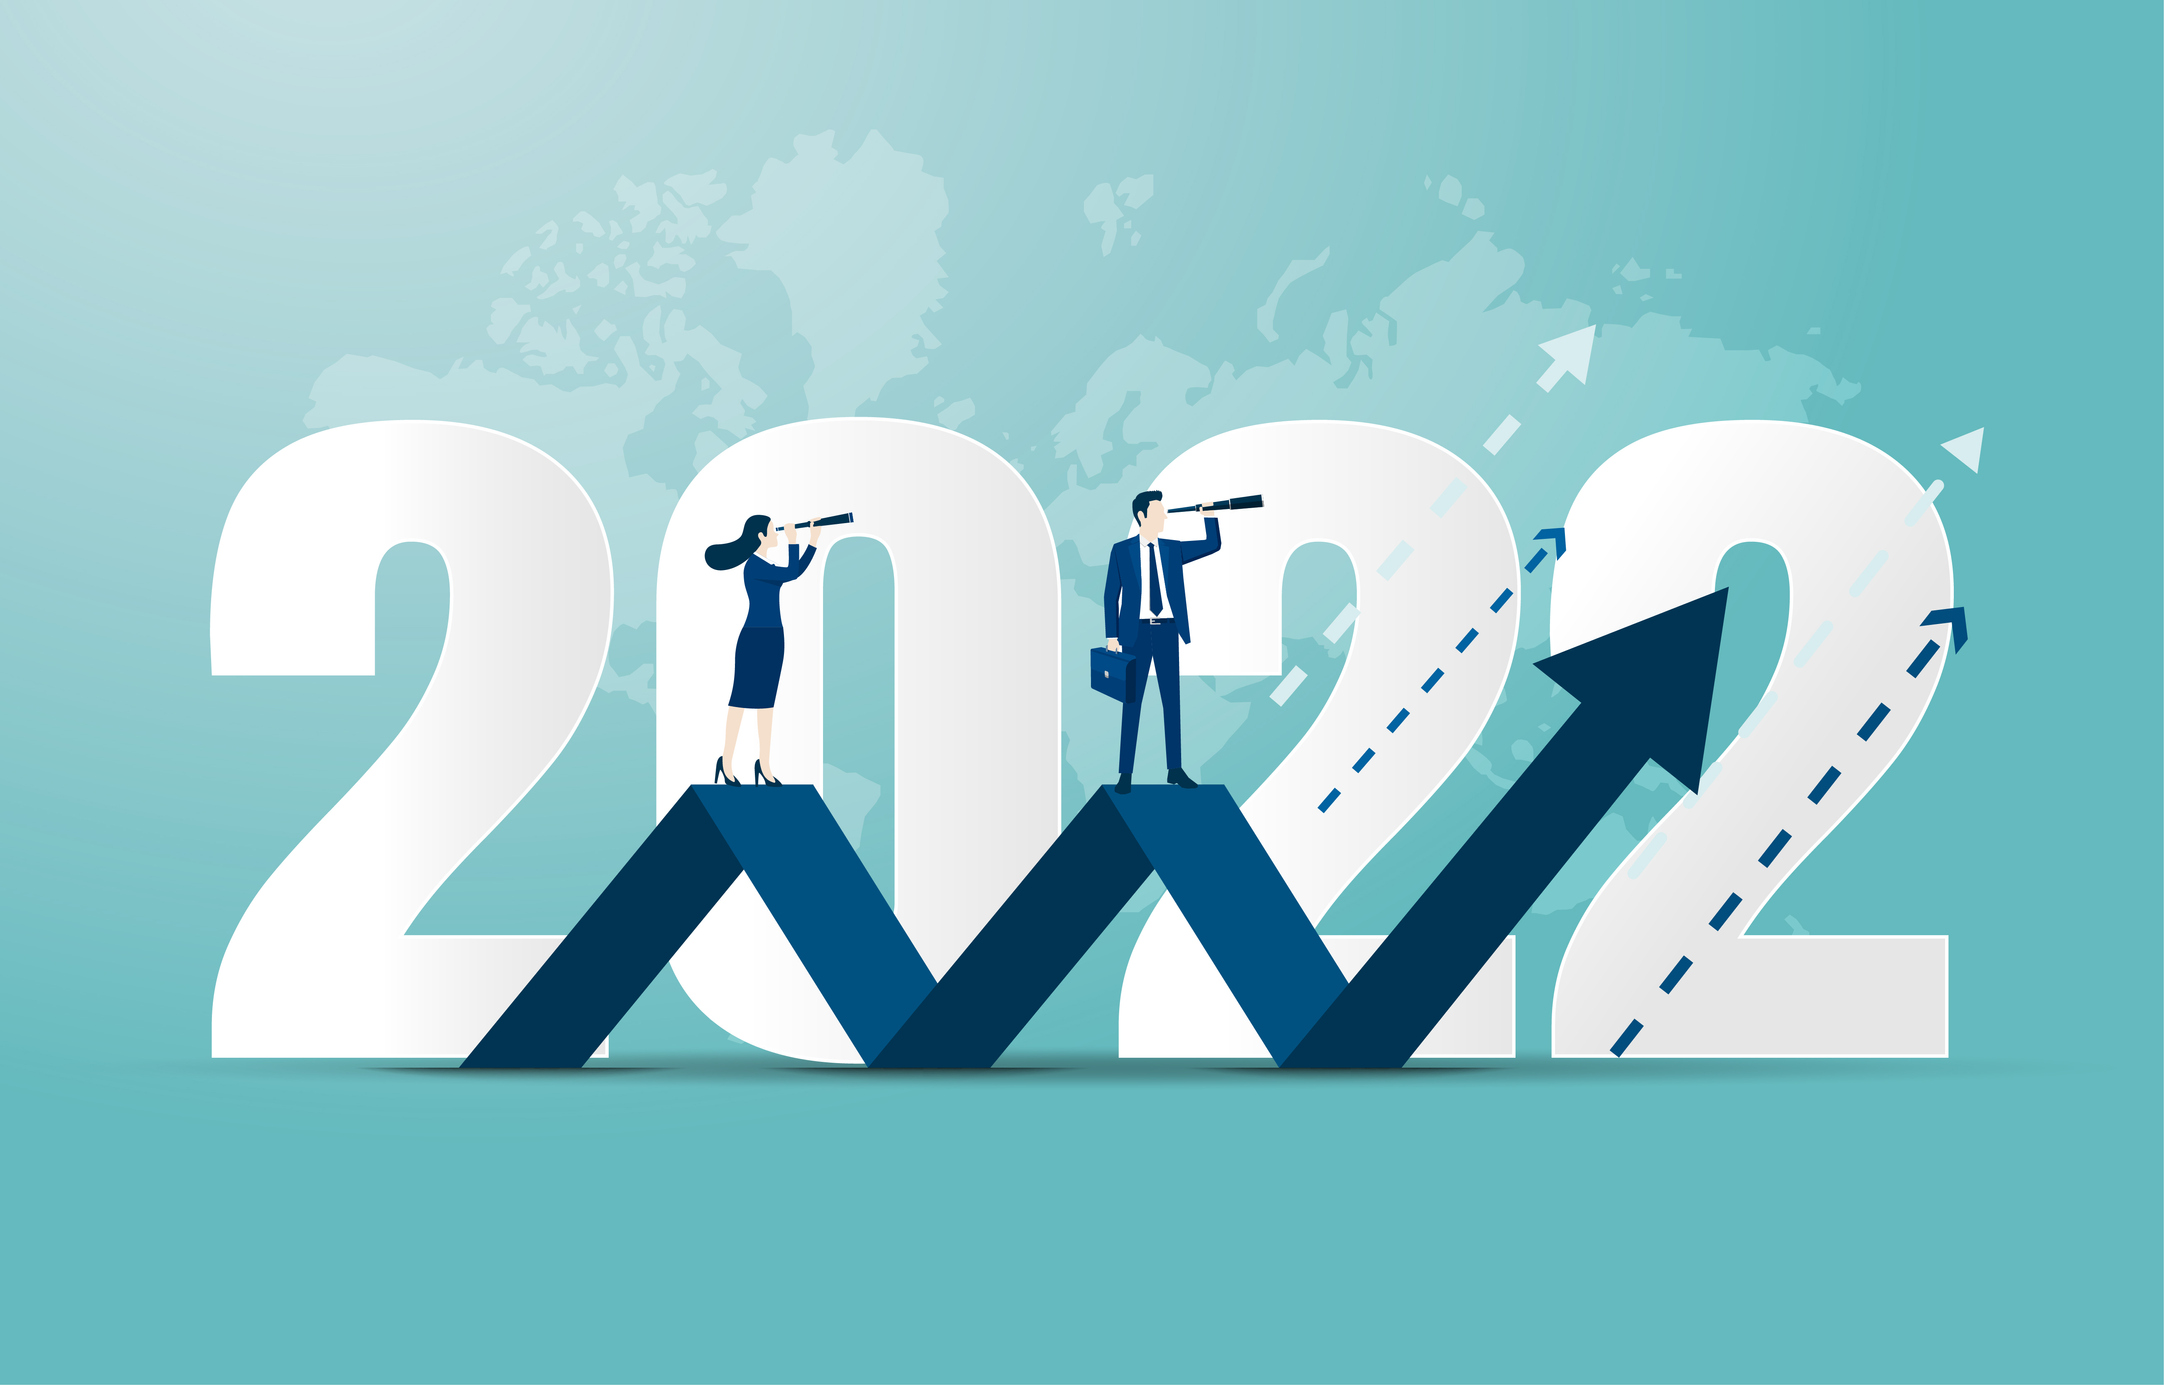 20 Issues to Watch in 2022 – Part I